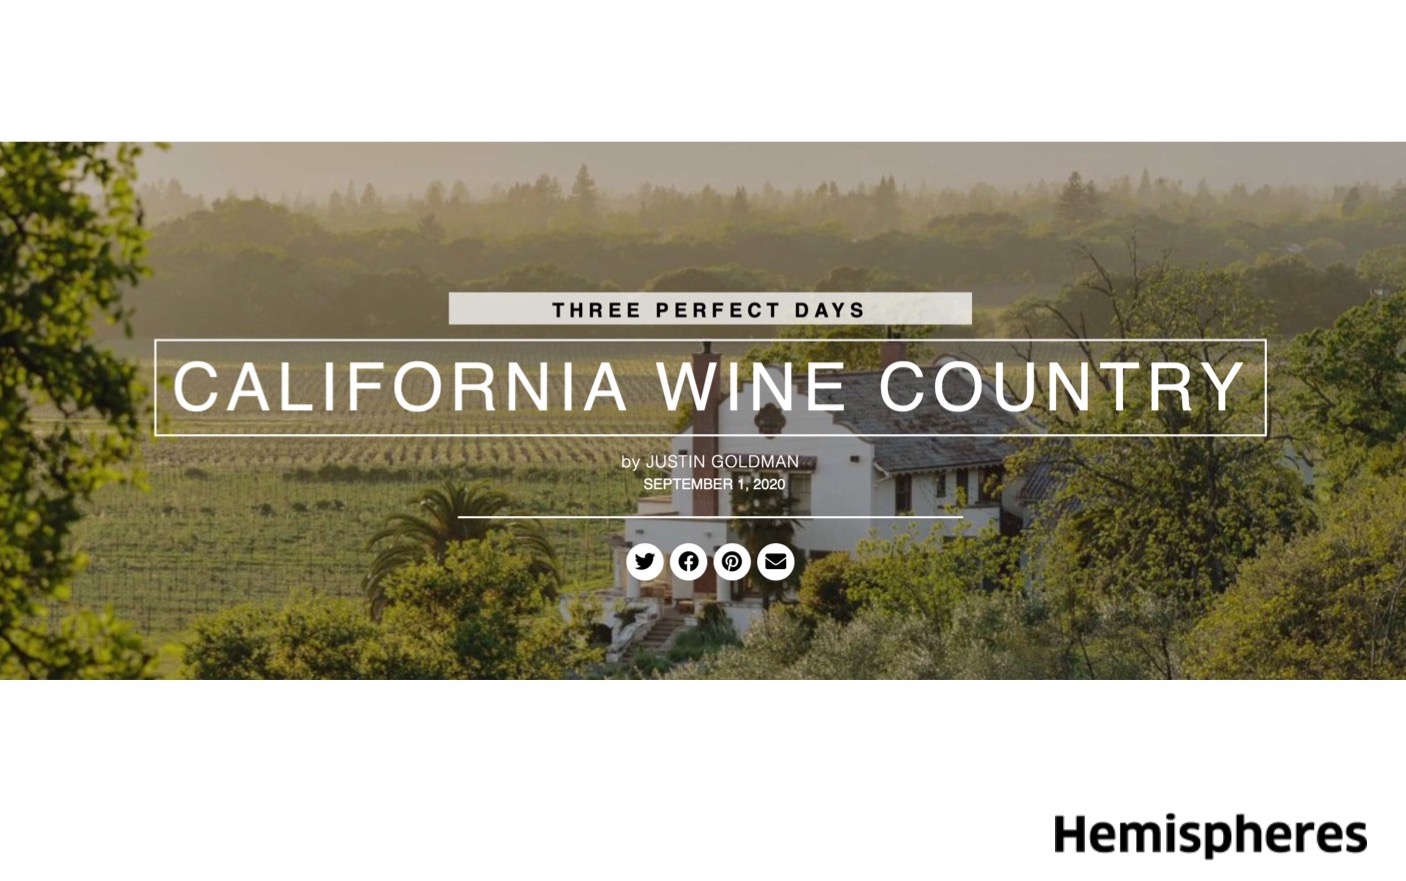 THREE PERFECT DAYS IN CALIFORNIA WINE COUNTRY